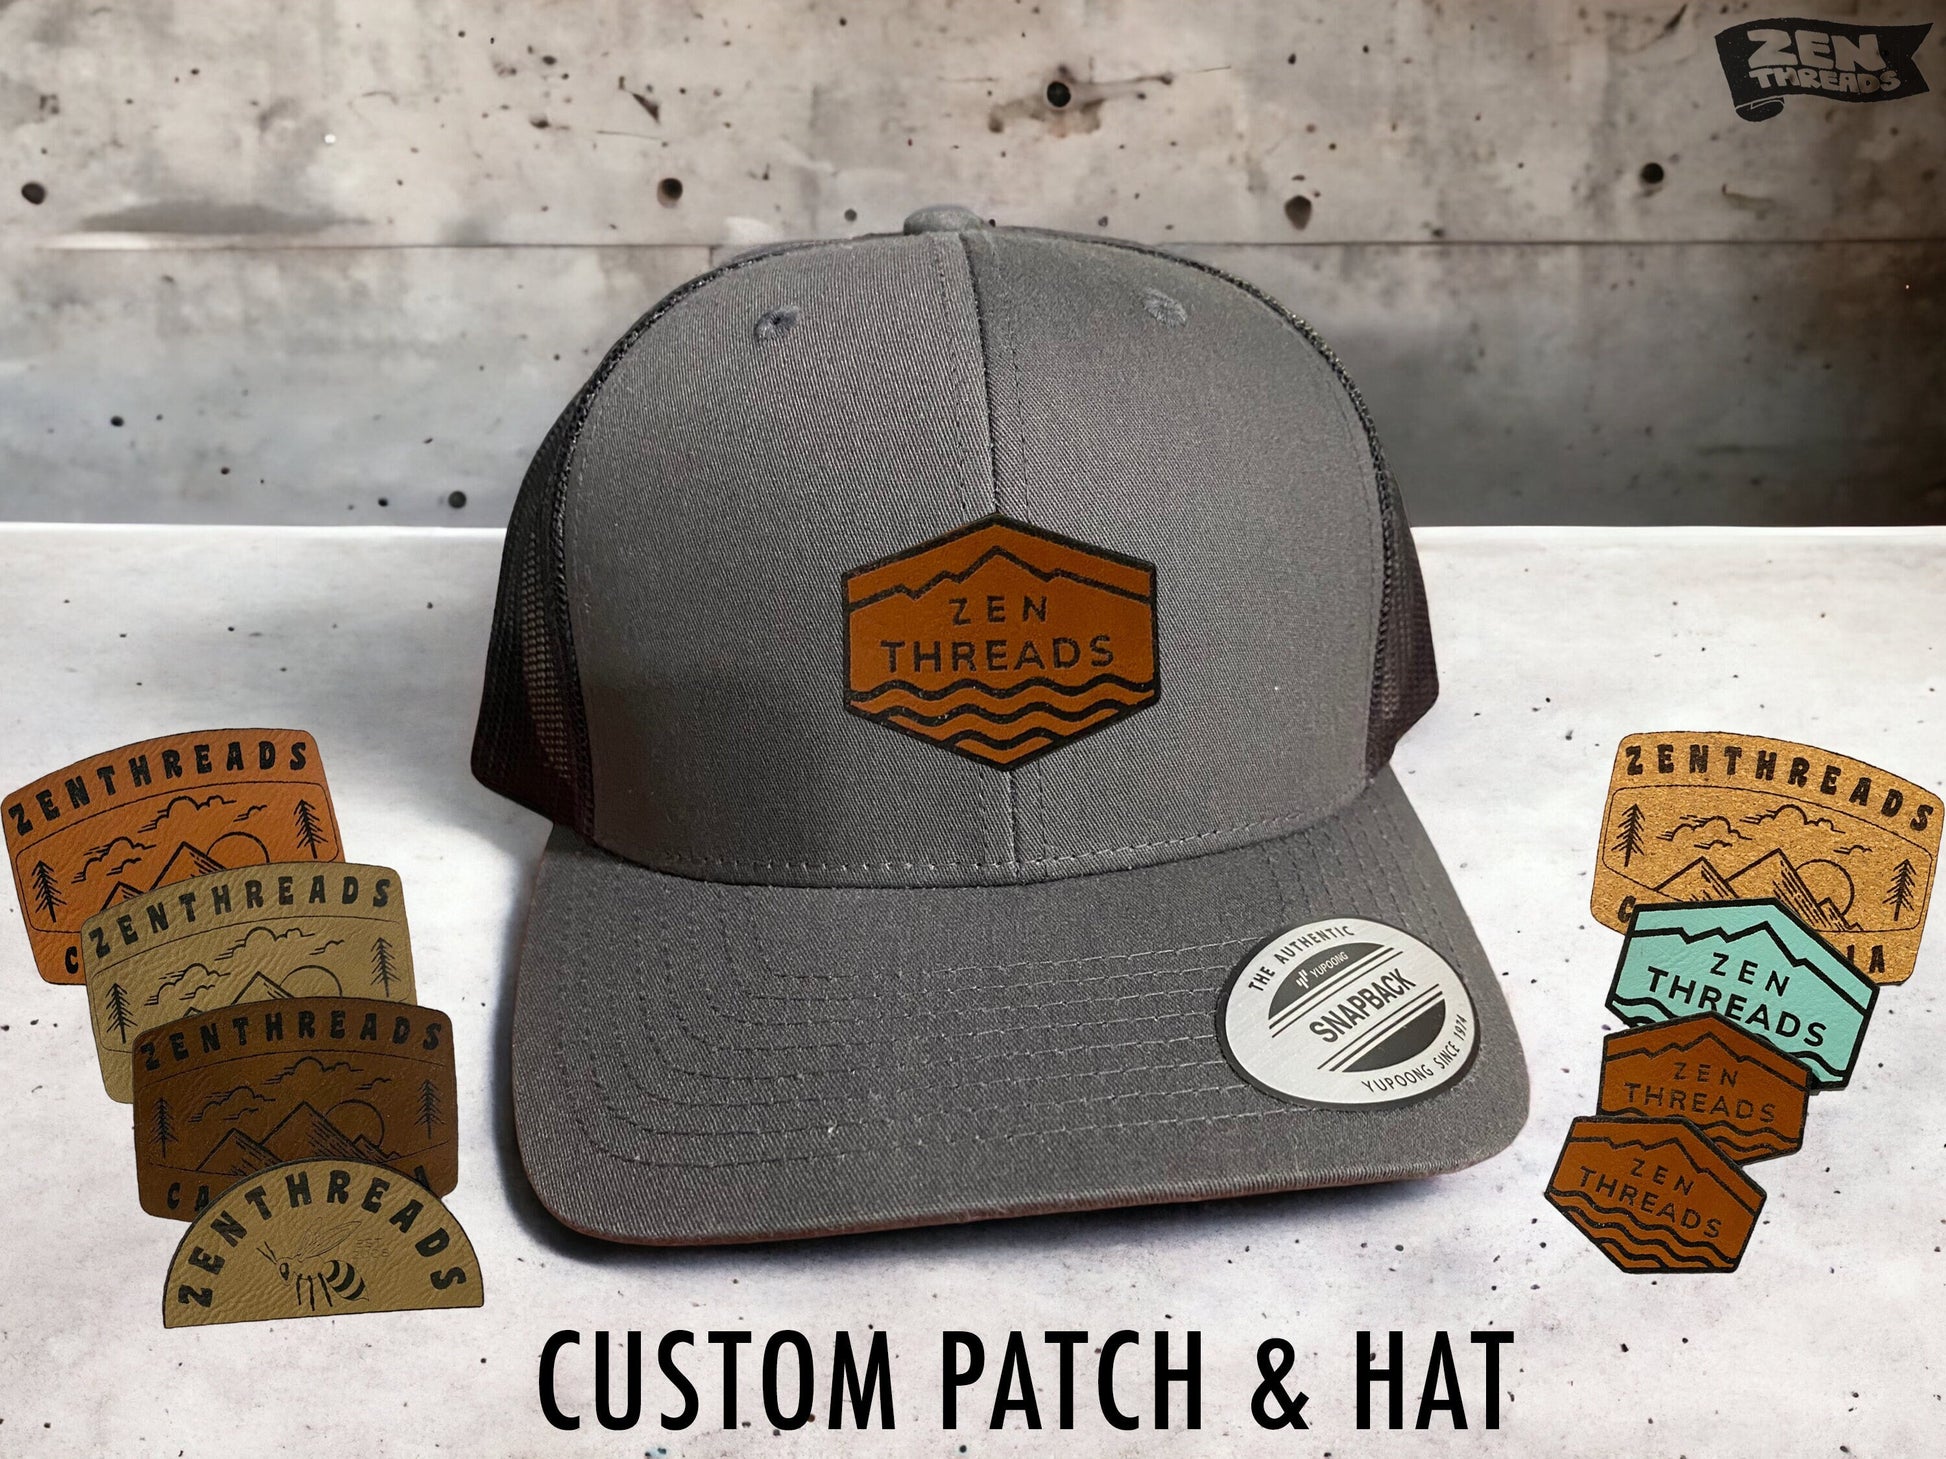 CUSTOM PATCH Classic Six Panel Trucker Logo Initials vegan Leather laser engraved customized personalized dad son hat business rivet tag hat